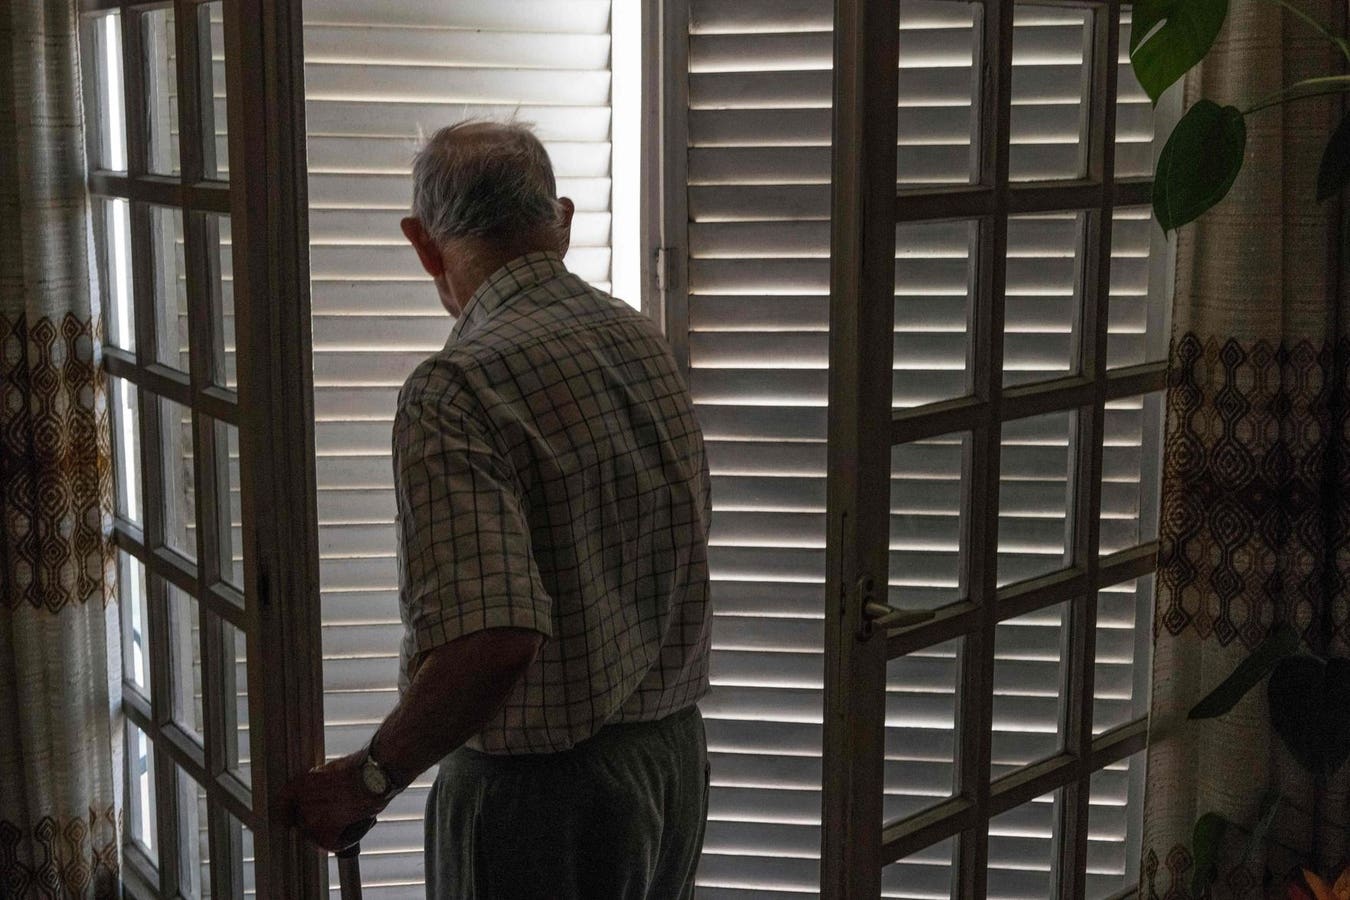 The Other Side Of Elder Abuse. Here’s What Older Caregivers Face